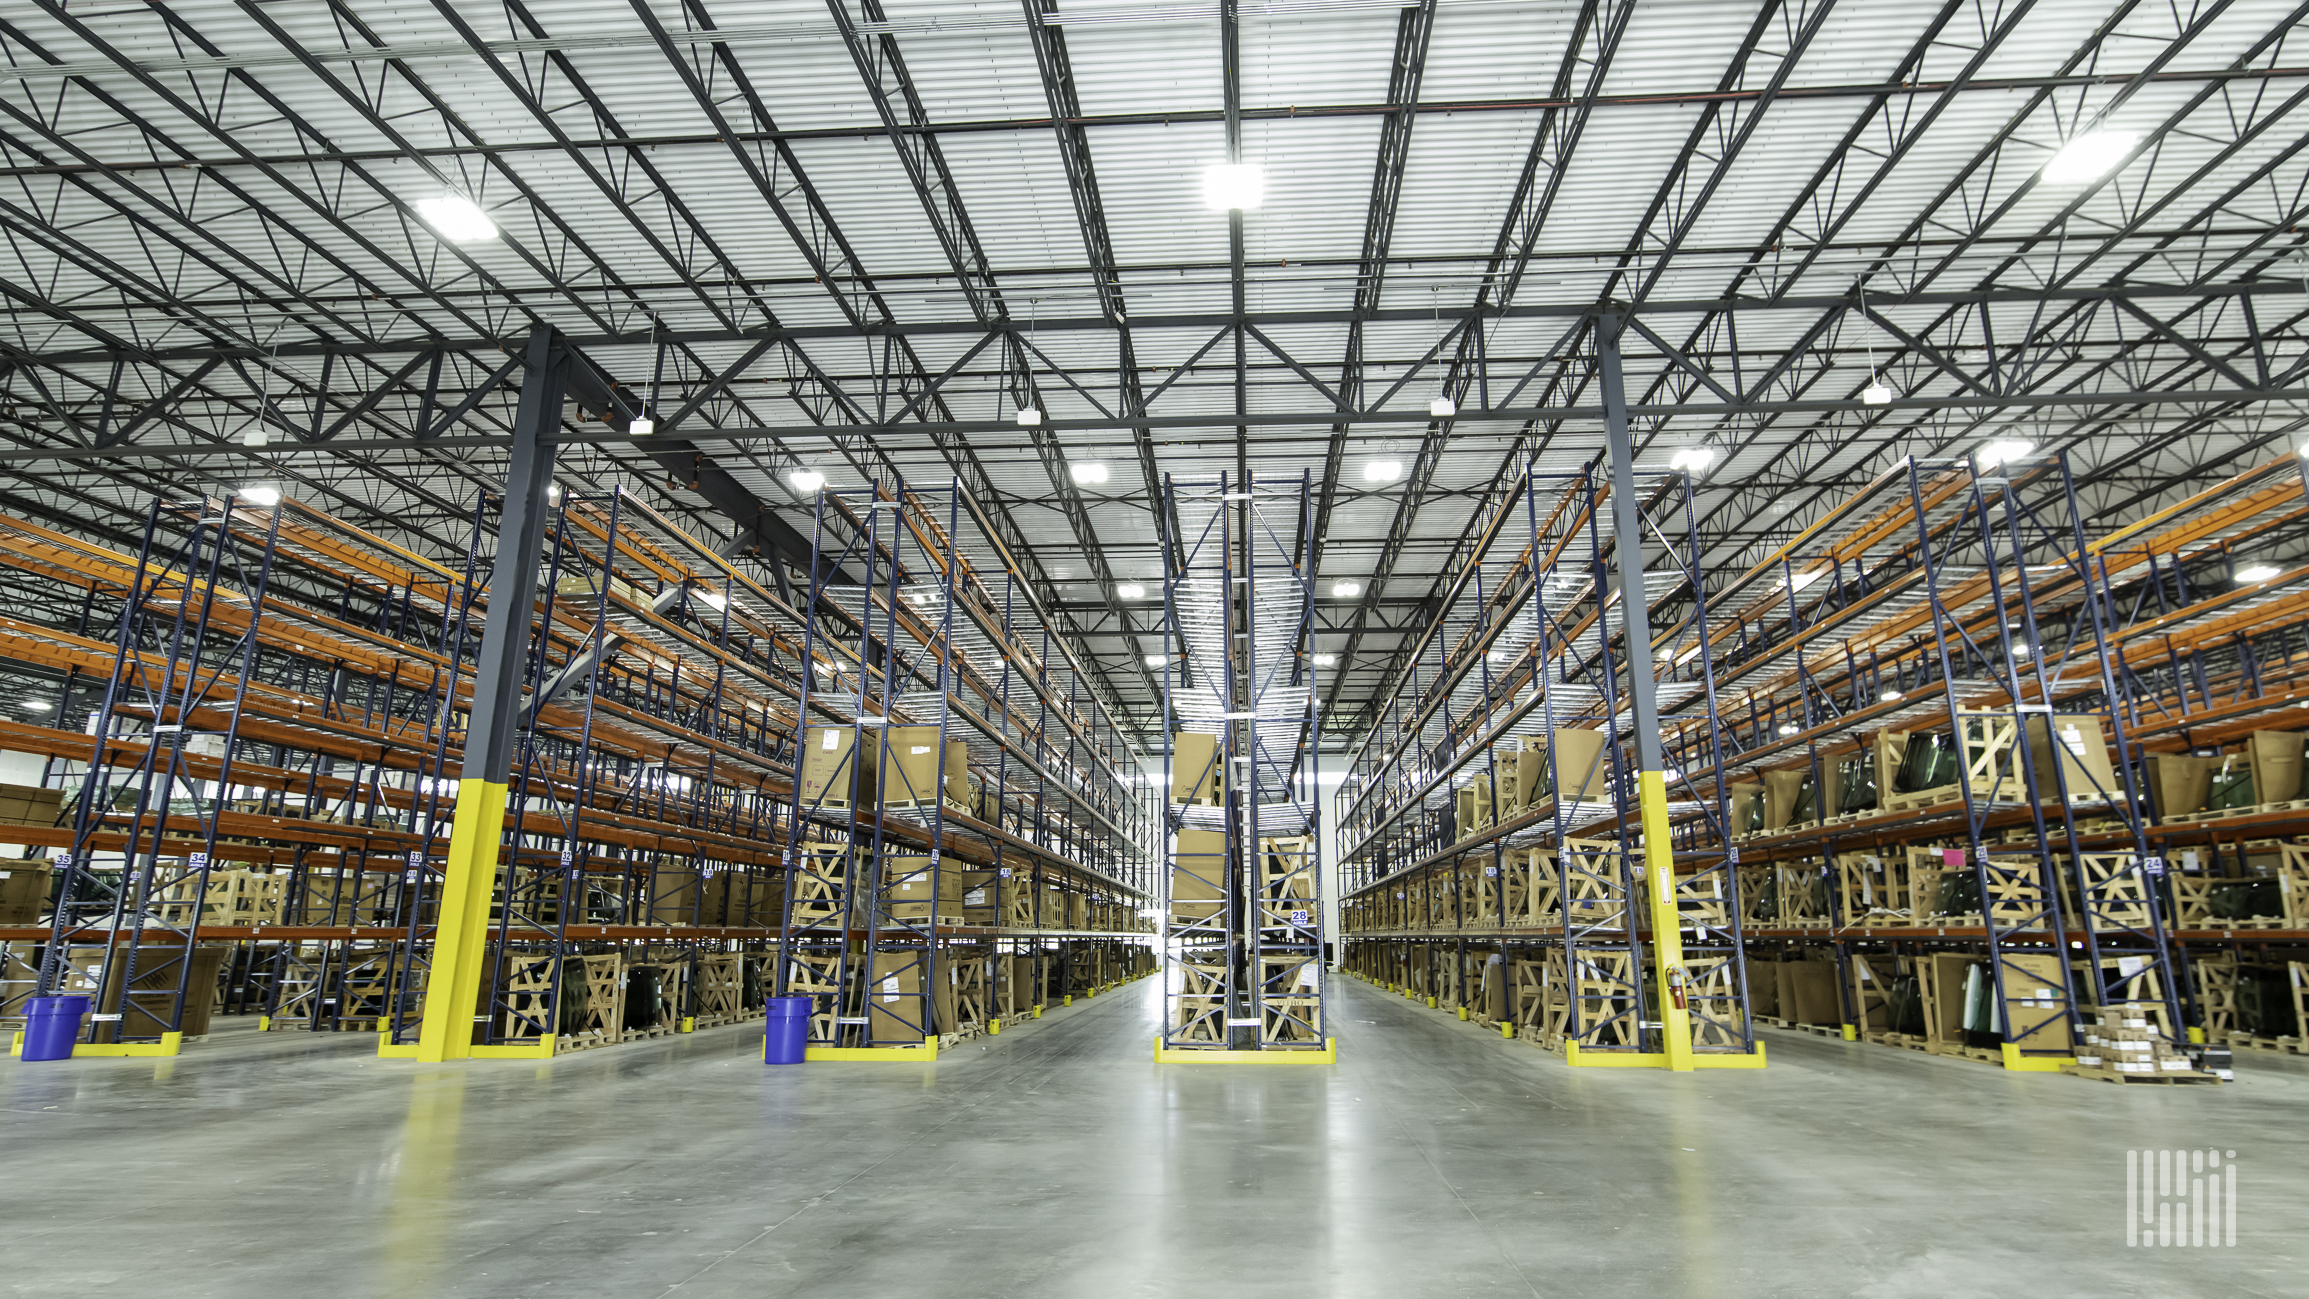 Inside a warehouse, aisles and bright lighting are visible.